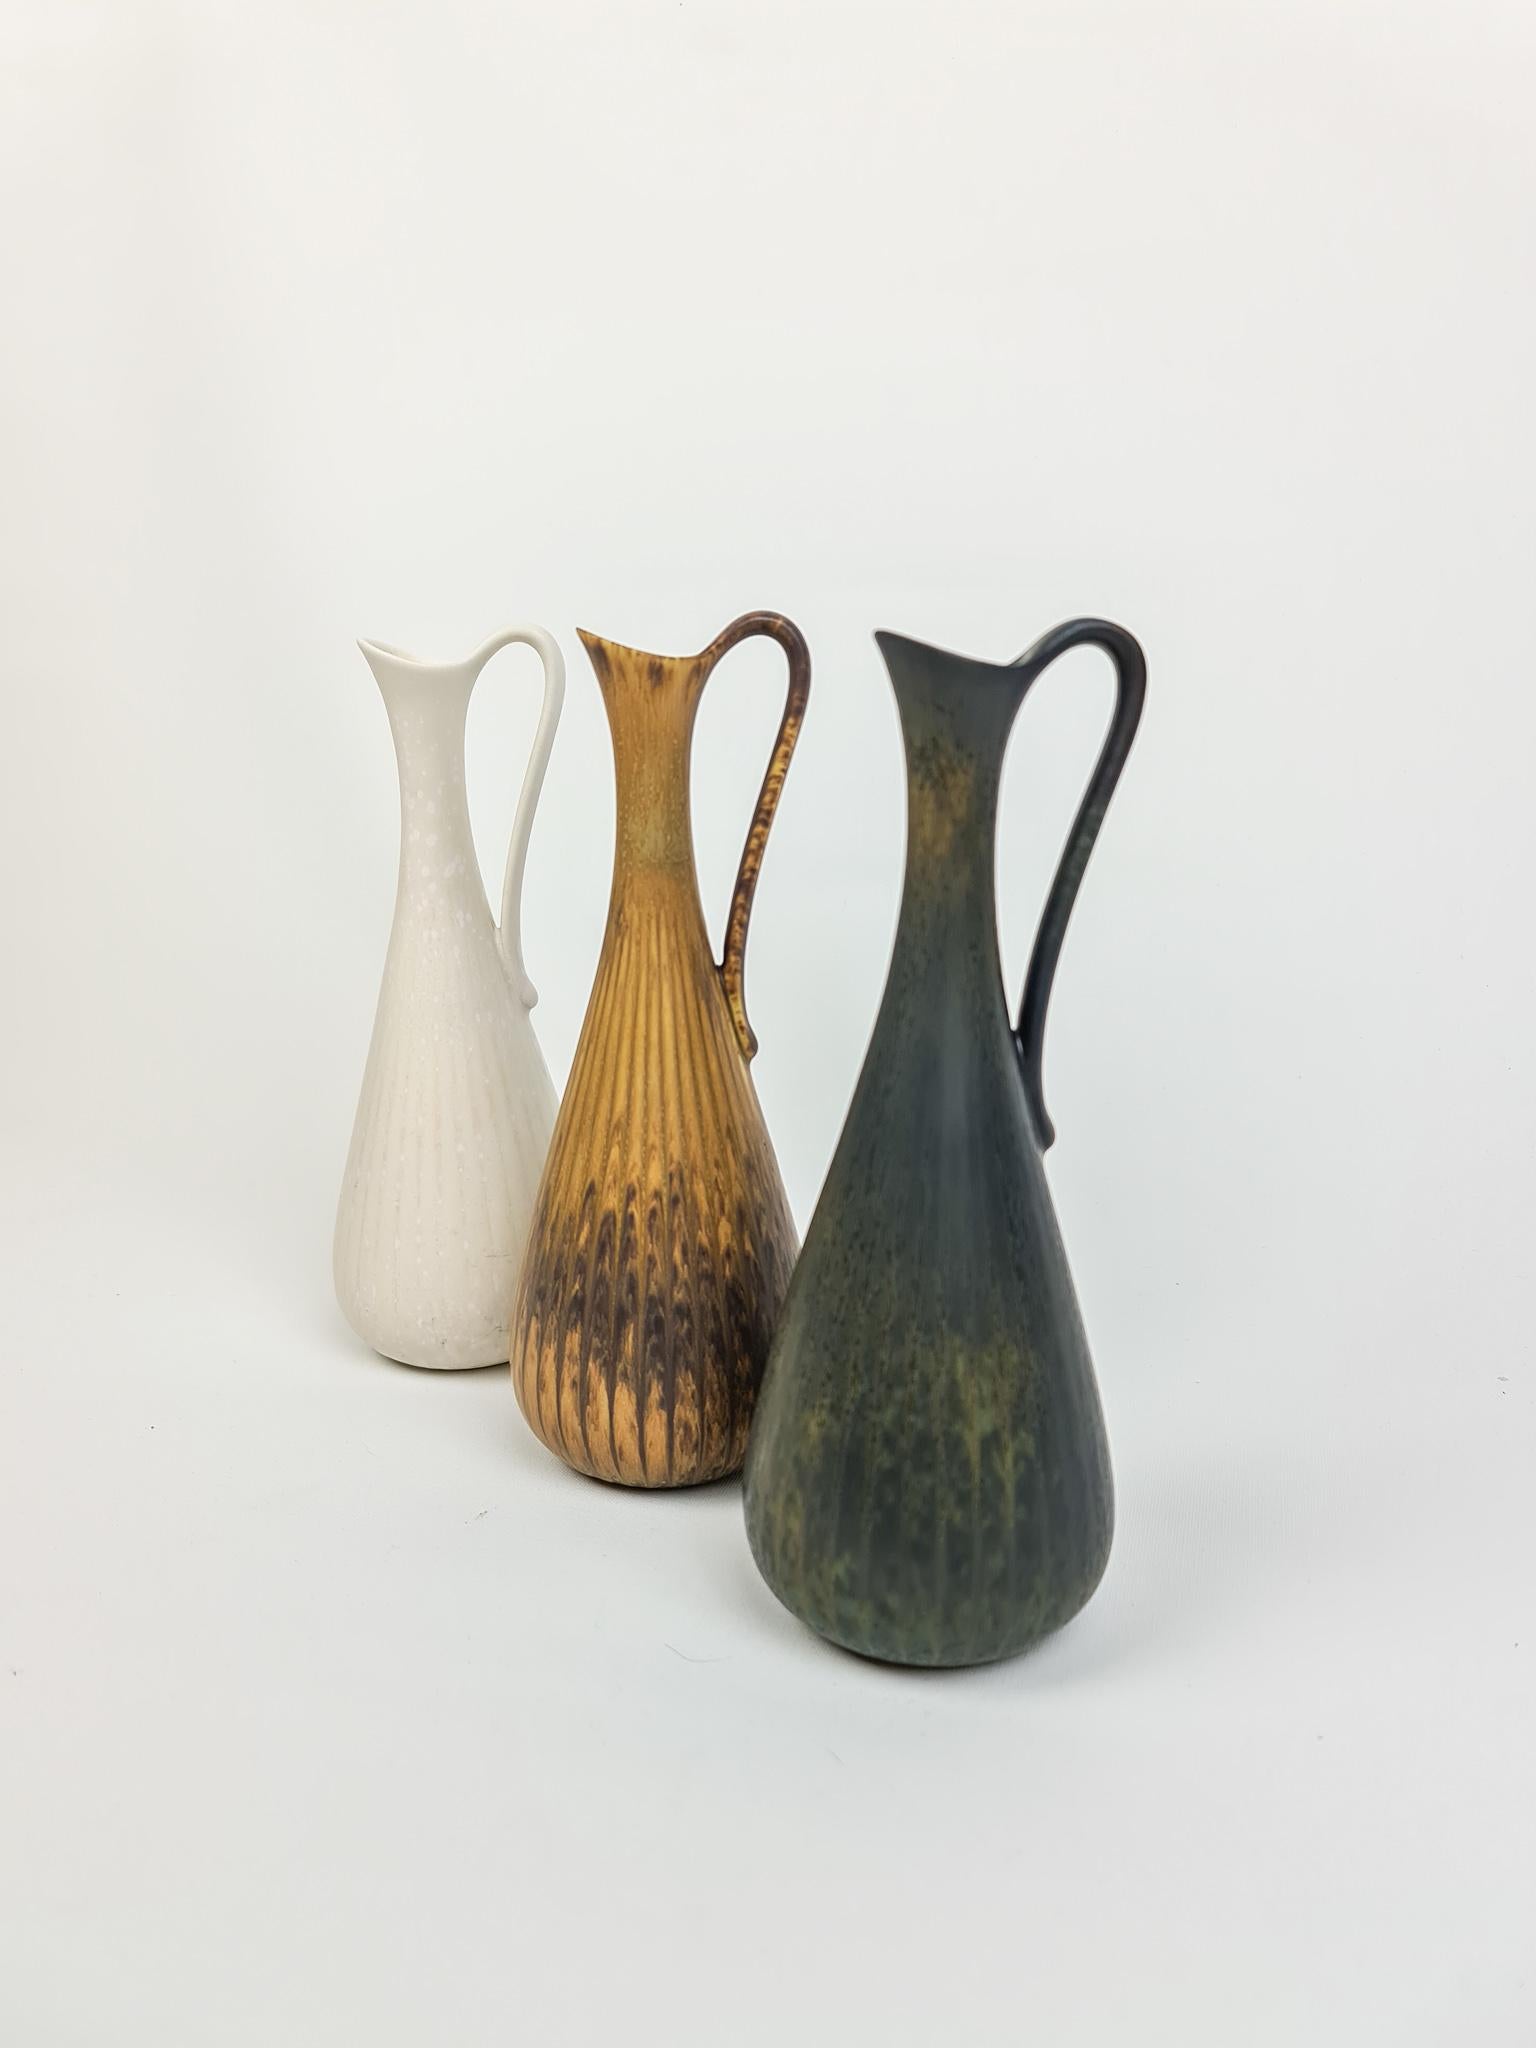 Three wonderful vases from Rörstrand and maker, designer Gunnar Nylund. Made in Sweden in the midcentury. Beautiful glazed vases in good condition.

Measures: Height 20 cm, 7.9 in diameter 7 cm / 2.8 in.
  